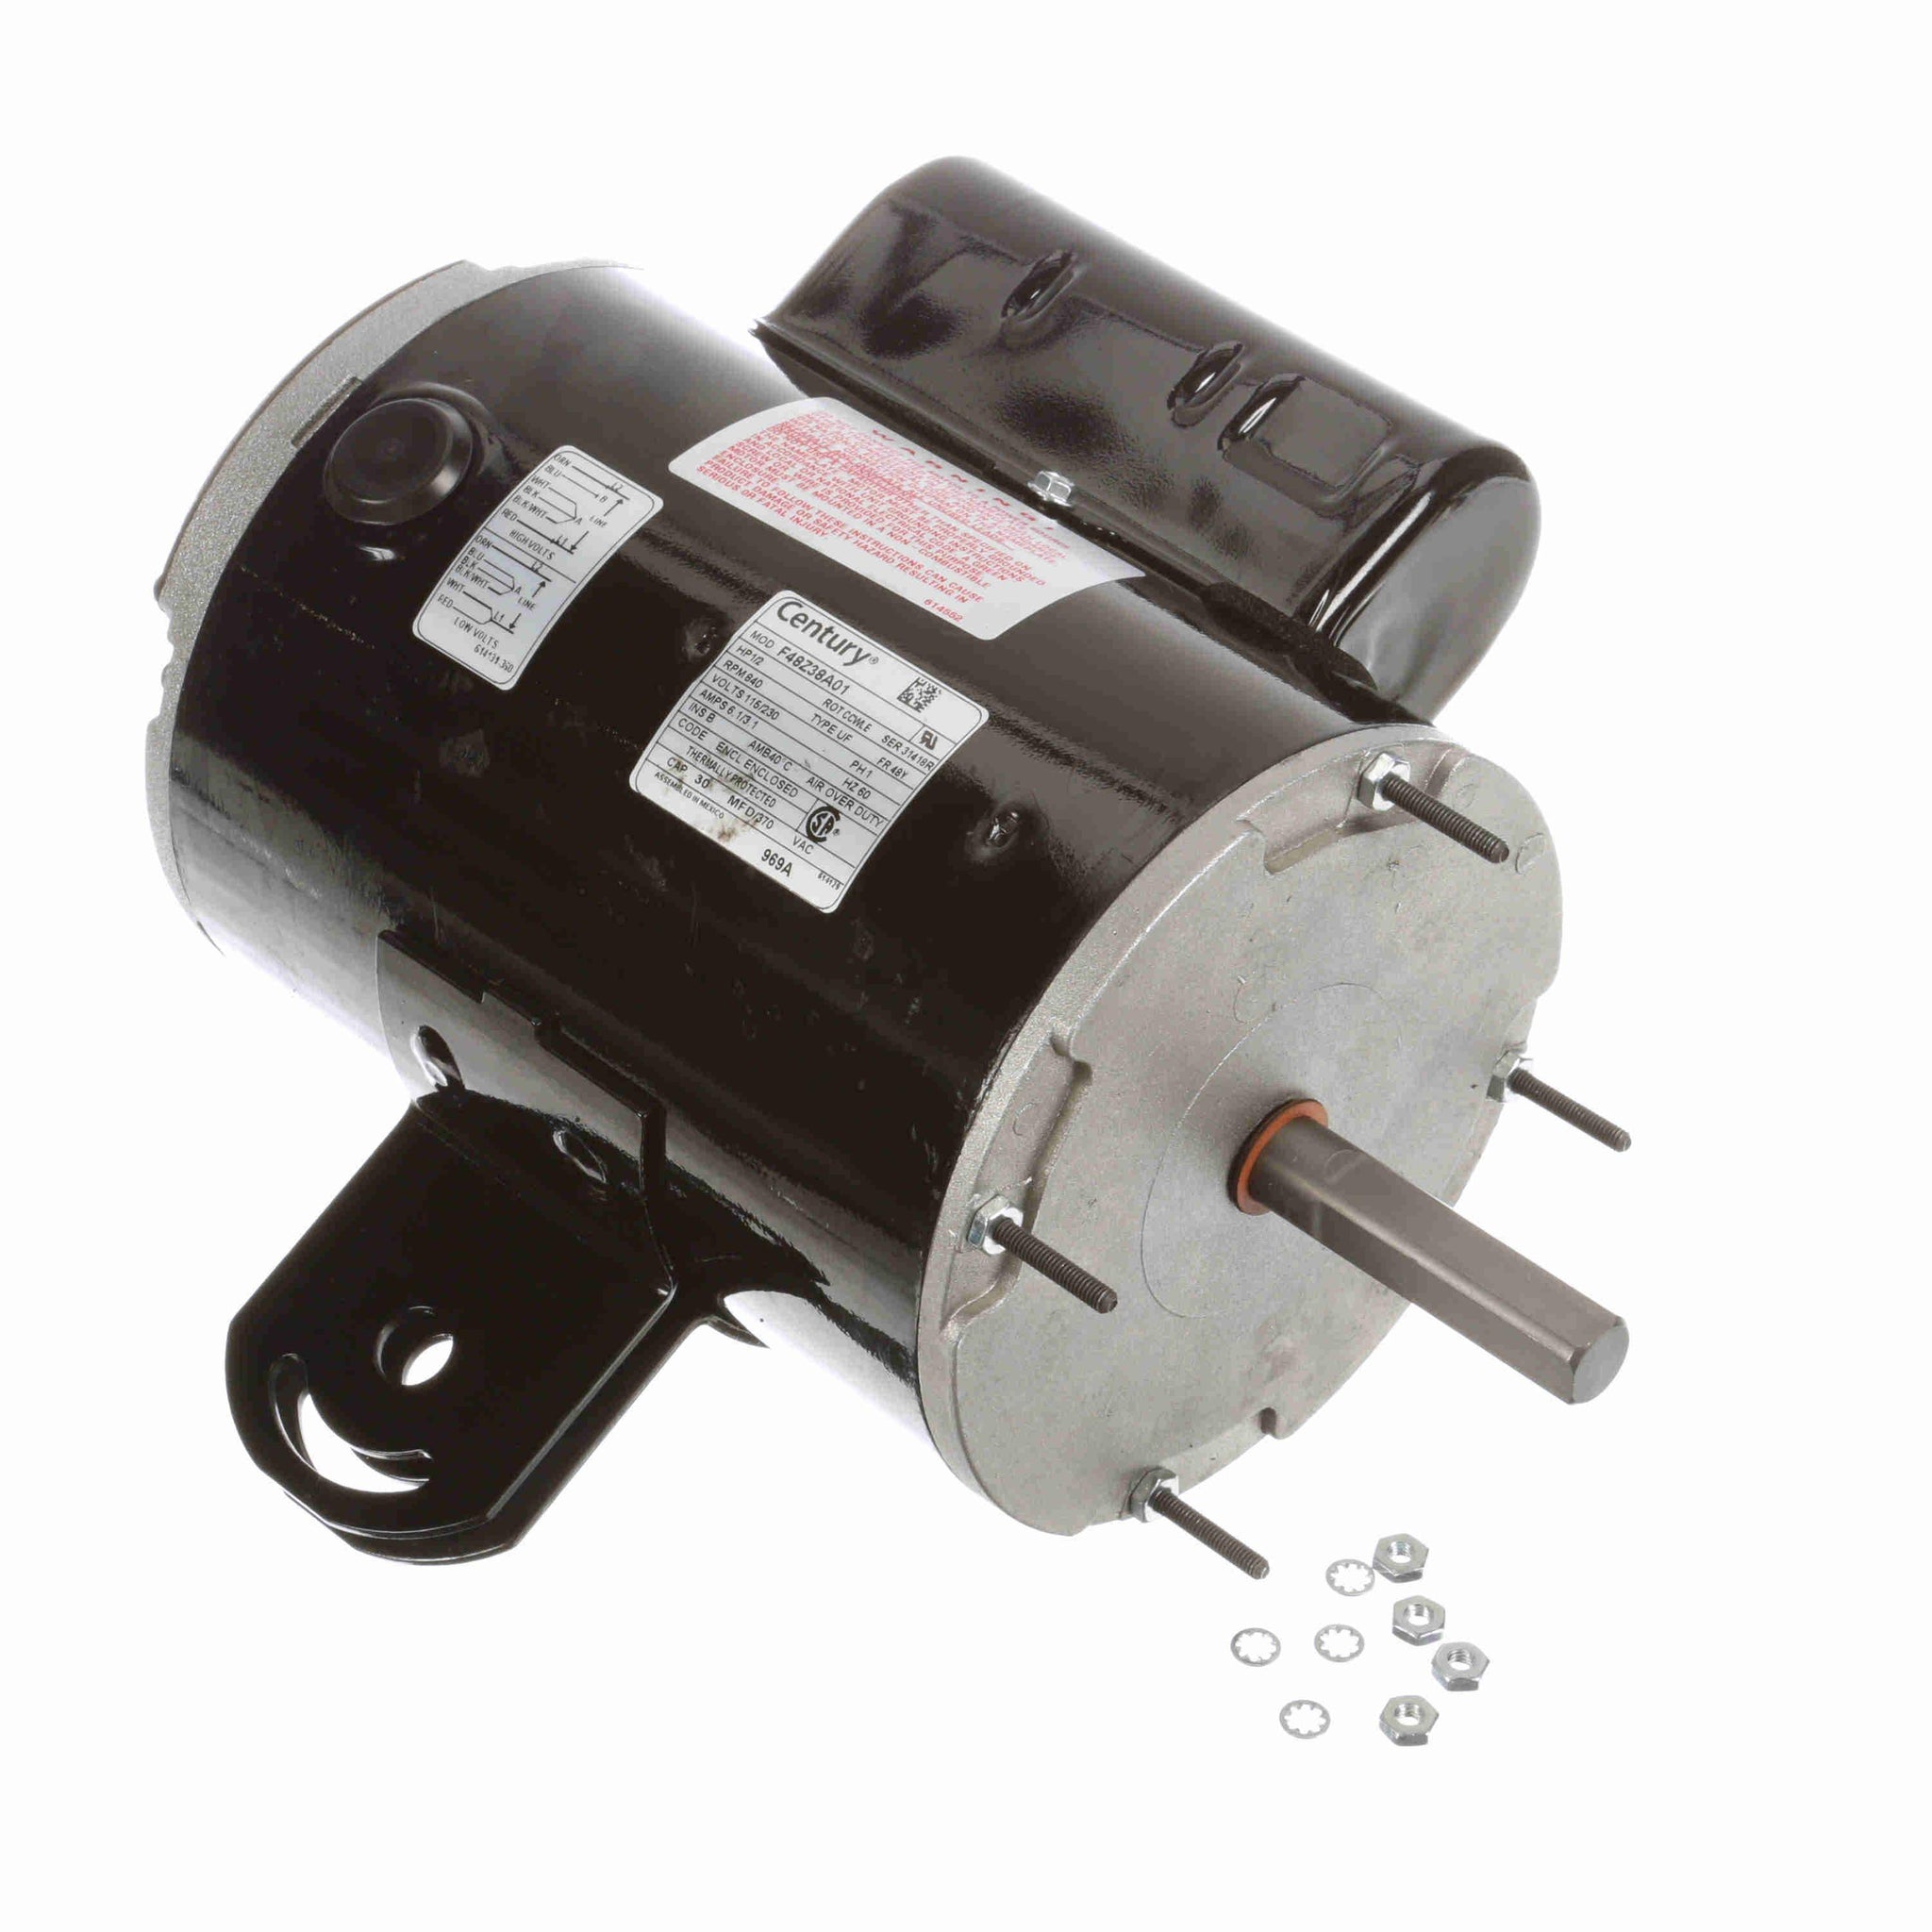 969A -  1/2 HP OEM Replacement Motor, 840 RPM, 115/230 Volts, 48 Frame, TEAO - Hardware & Moreee